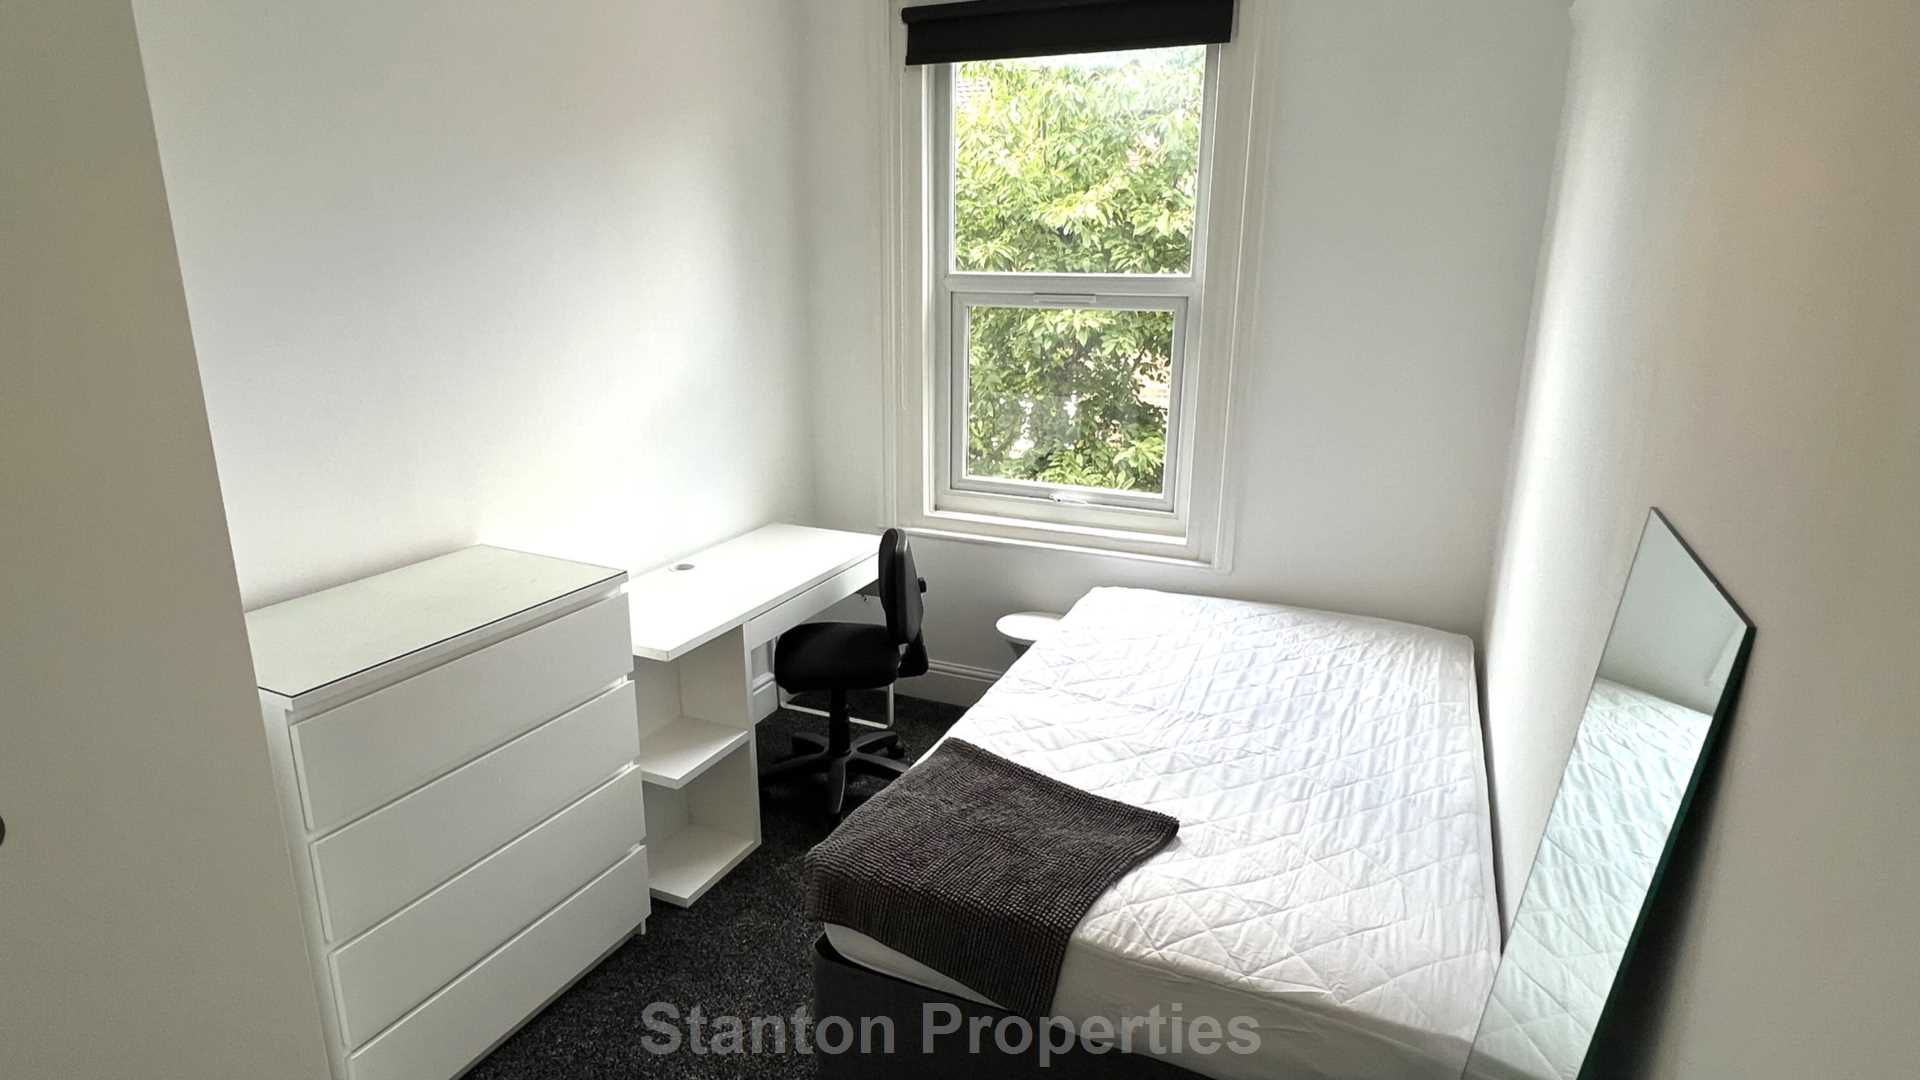 £145 pppw, Linden Grove, Fallowfield, Image 15